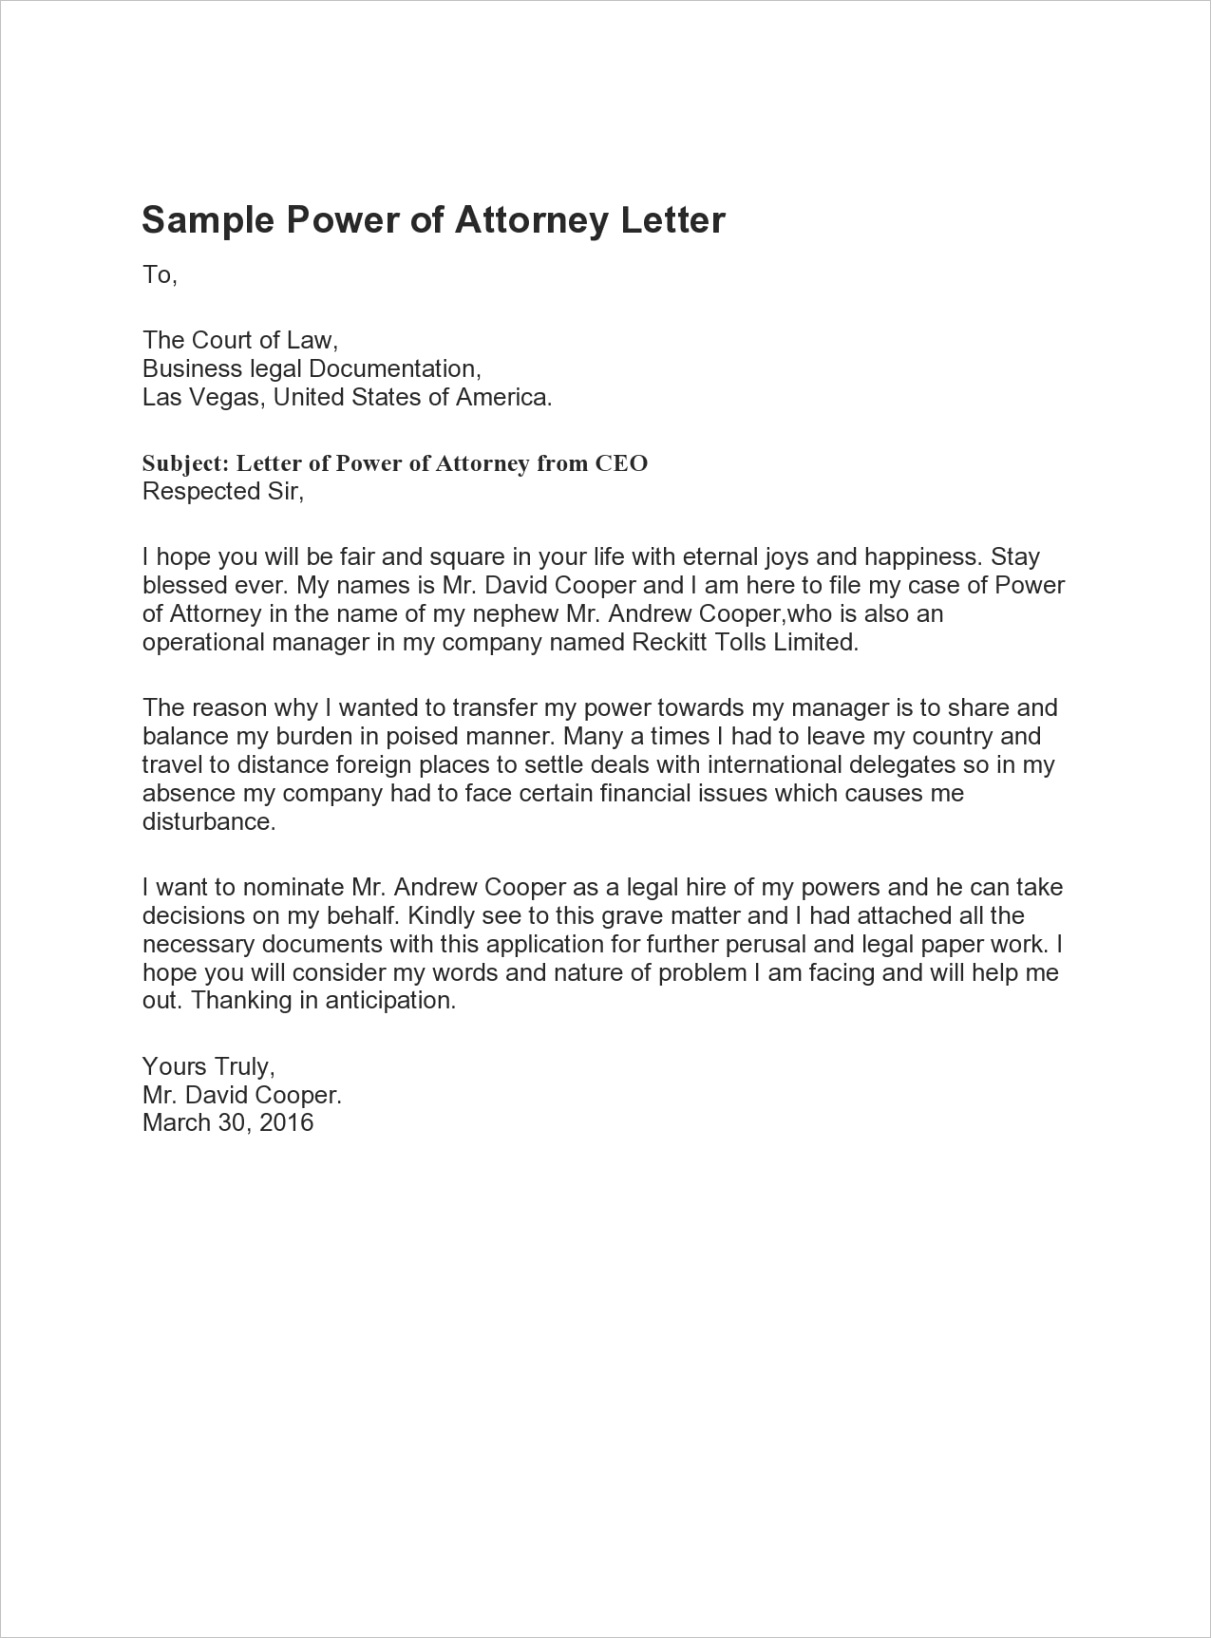 power of attorney letter